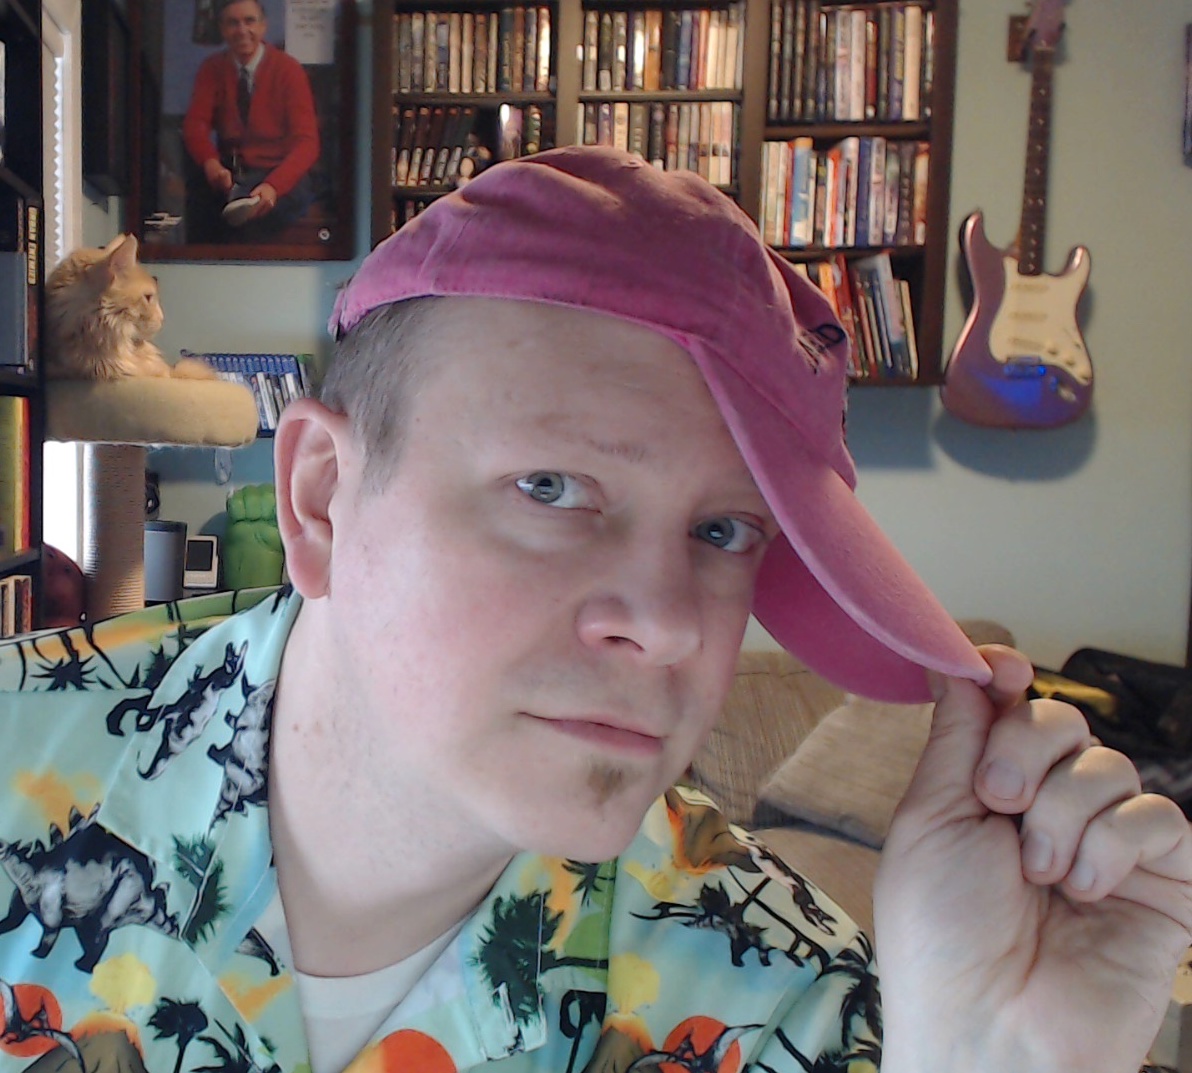 Dinosaur shirts ALWAYS go well with pink hats...